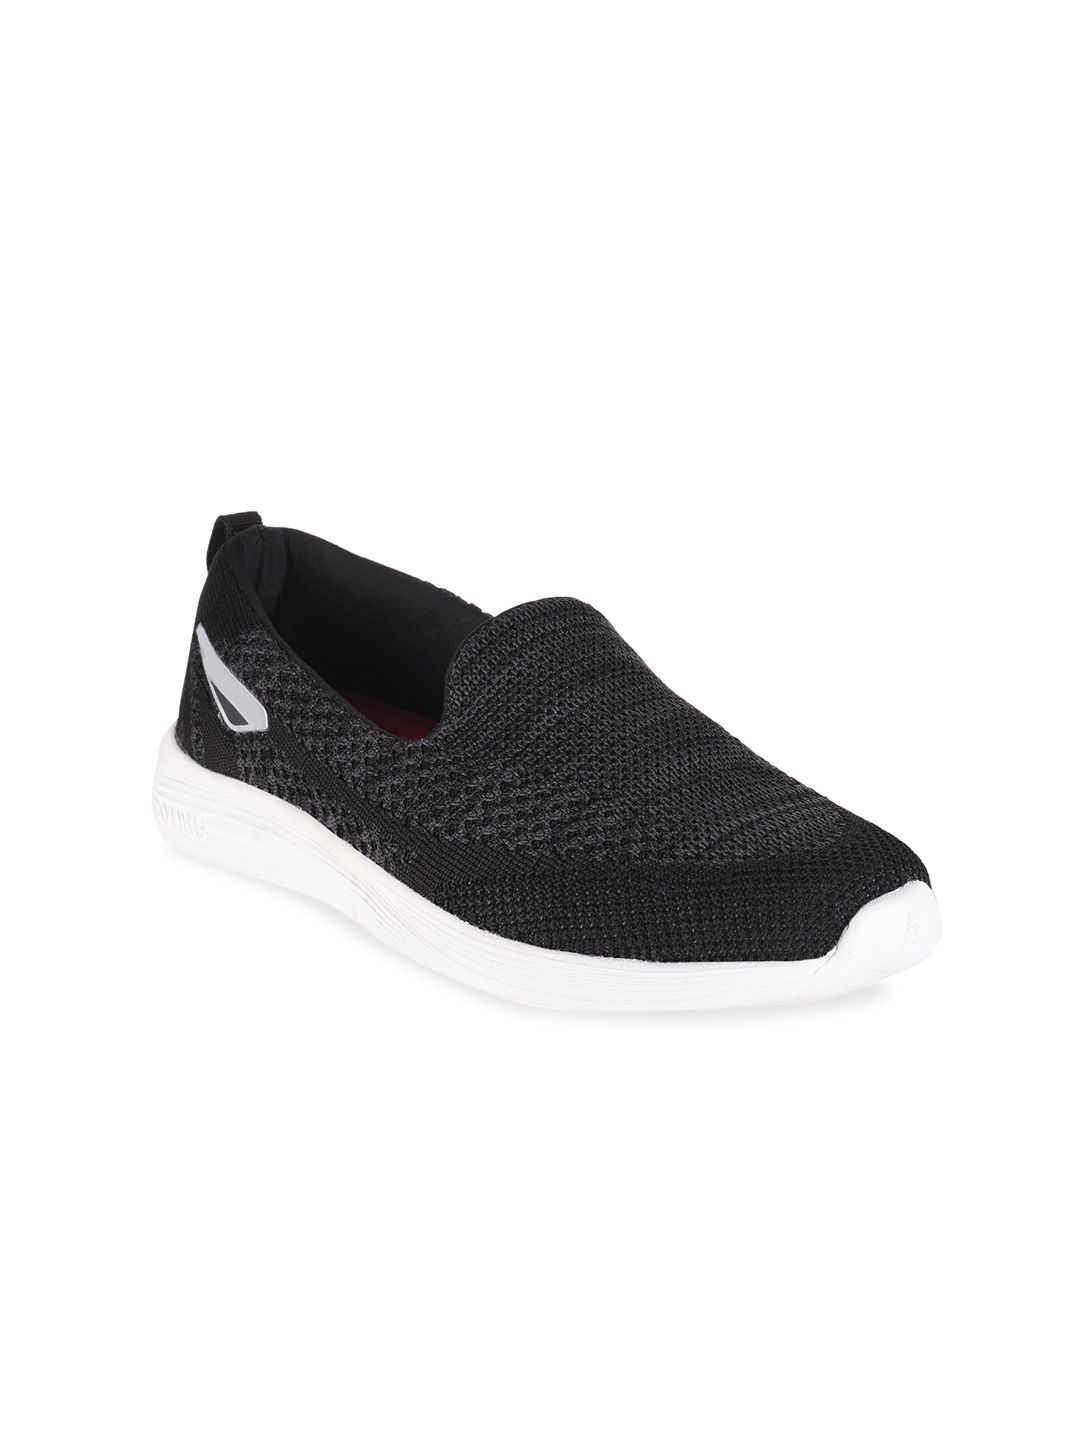 Action Athleo ATL-23 Women Black Mesh Running Shoes Price in India